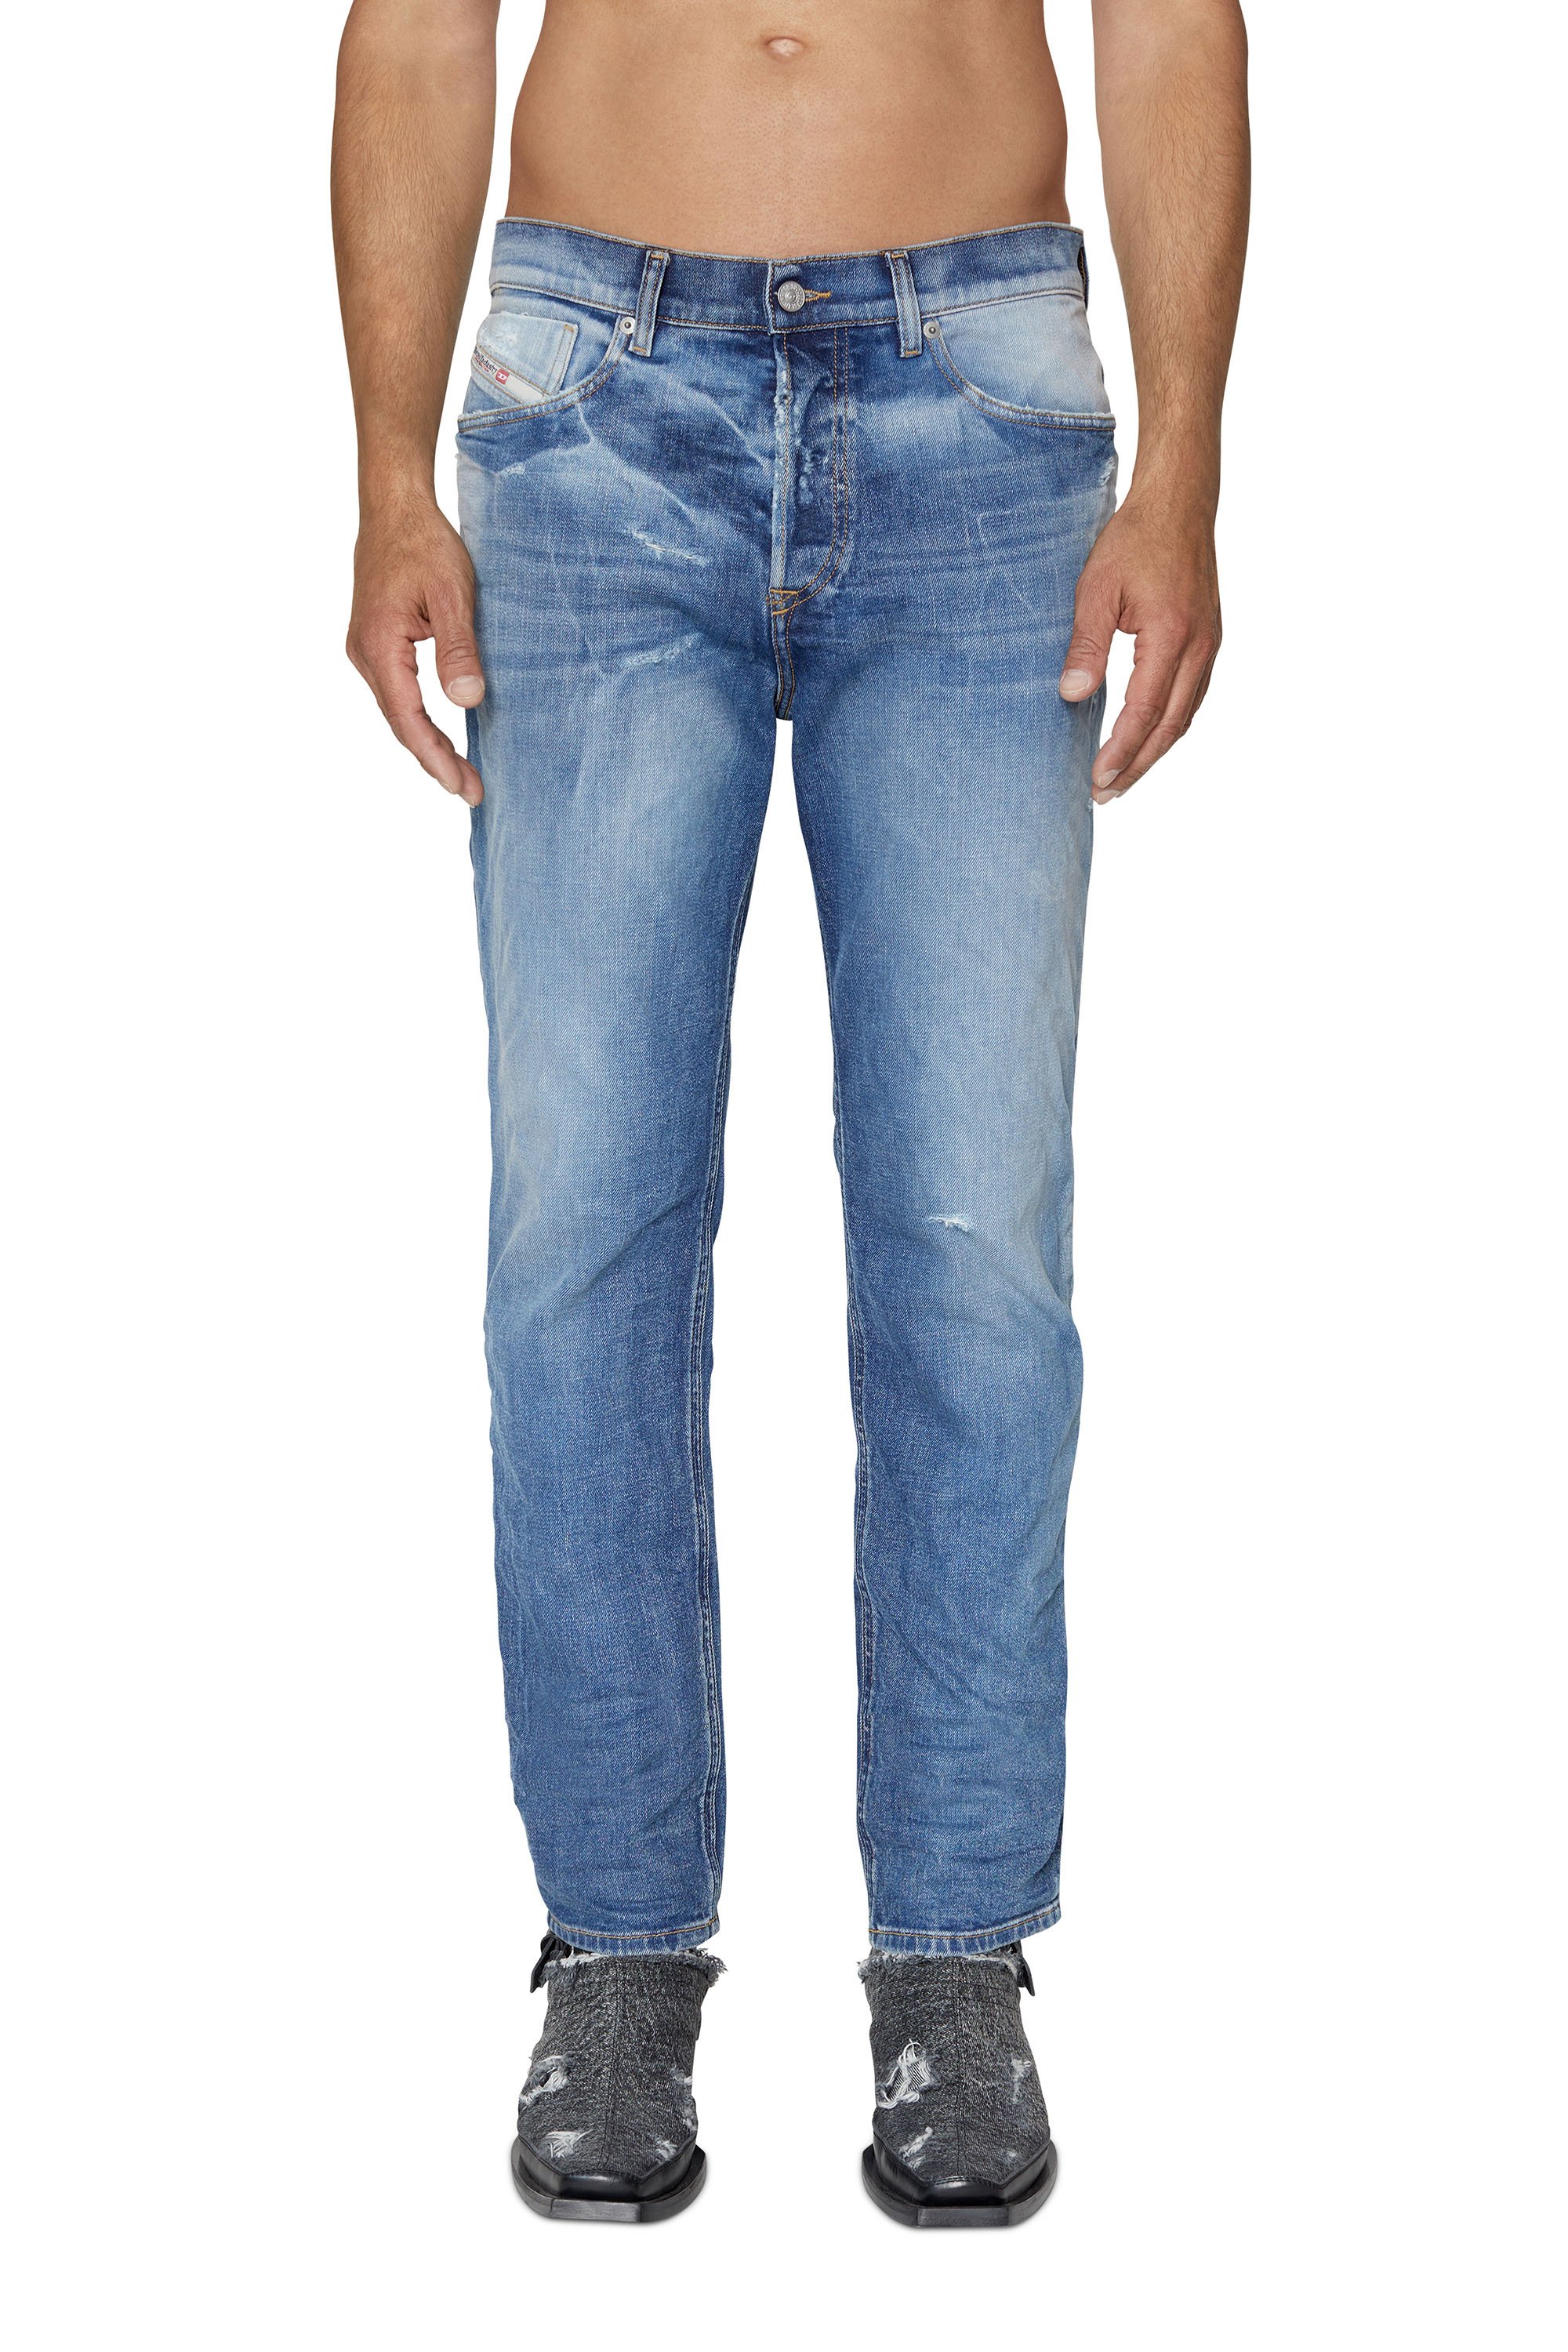 2005 D-FINING 09E16 Tapered Jeans, Medium blue - Jeans